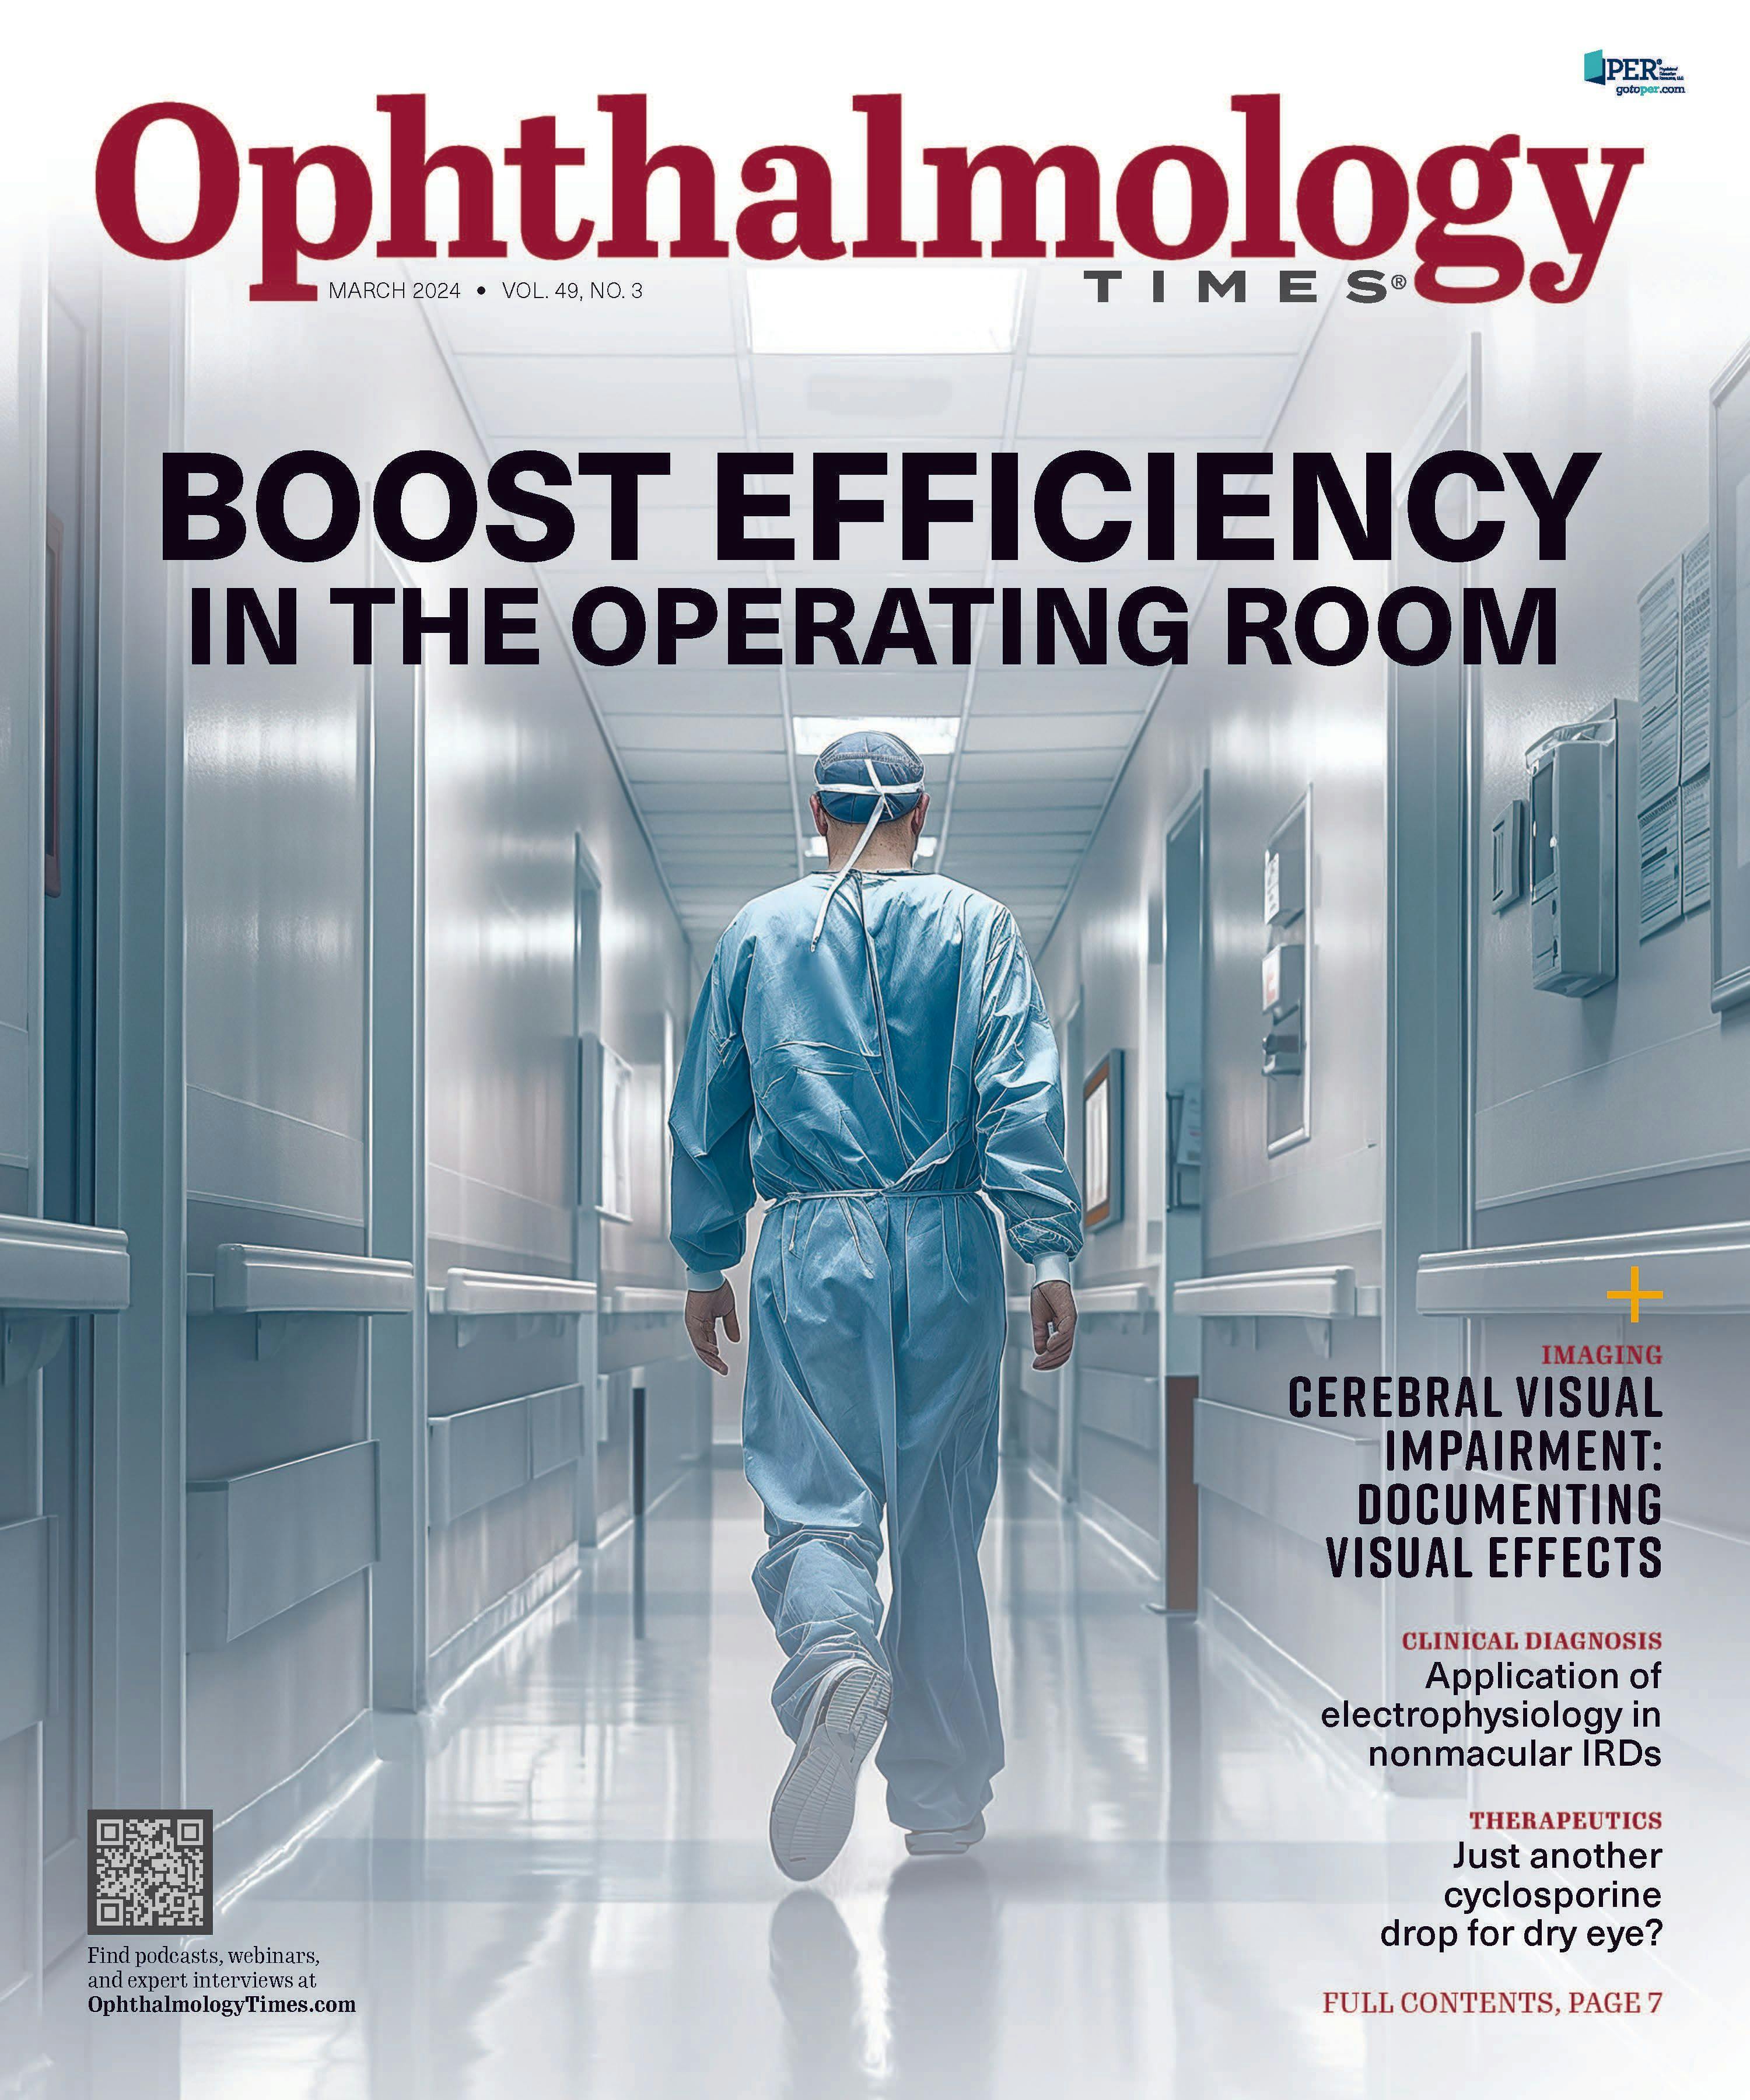 Ophthalmology Times: March 2024